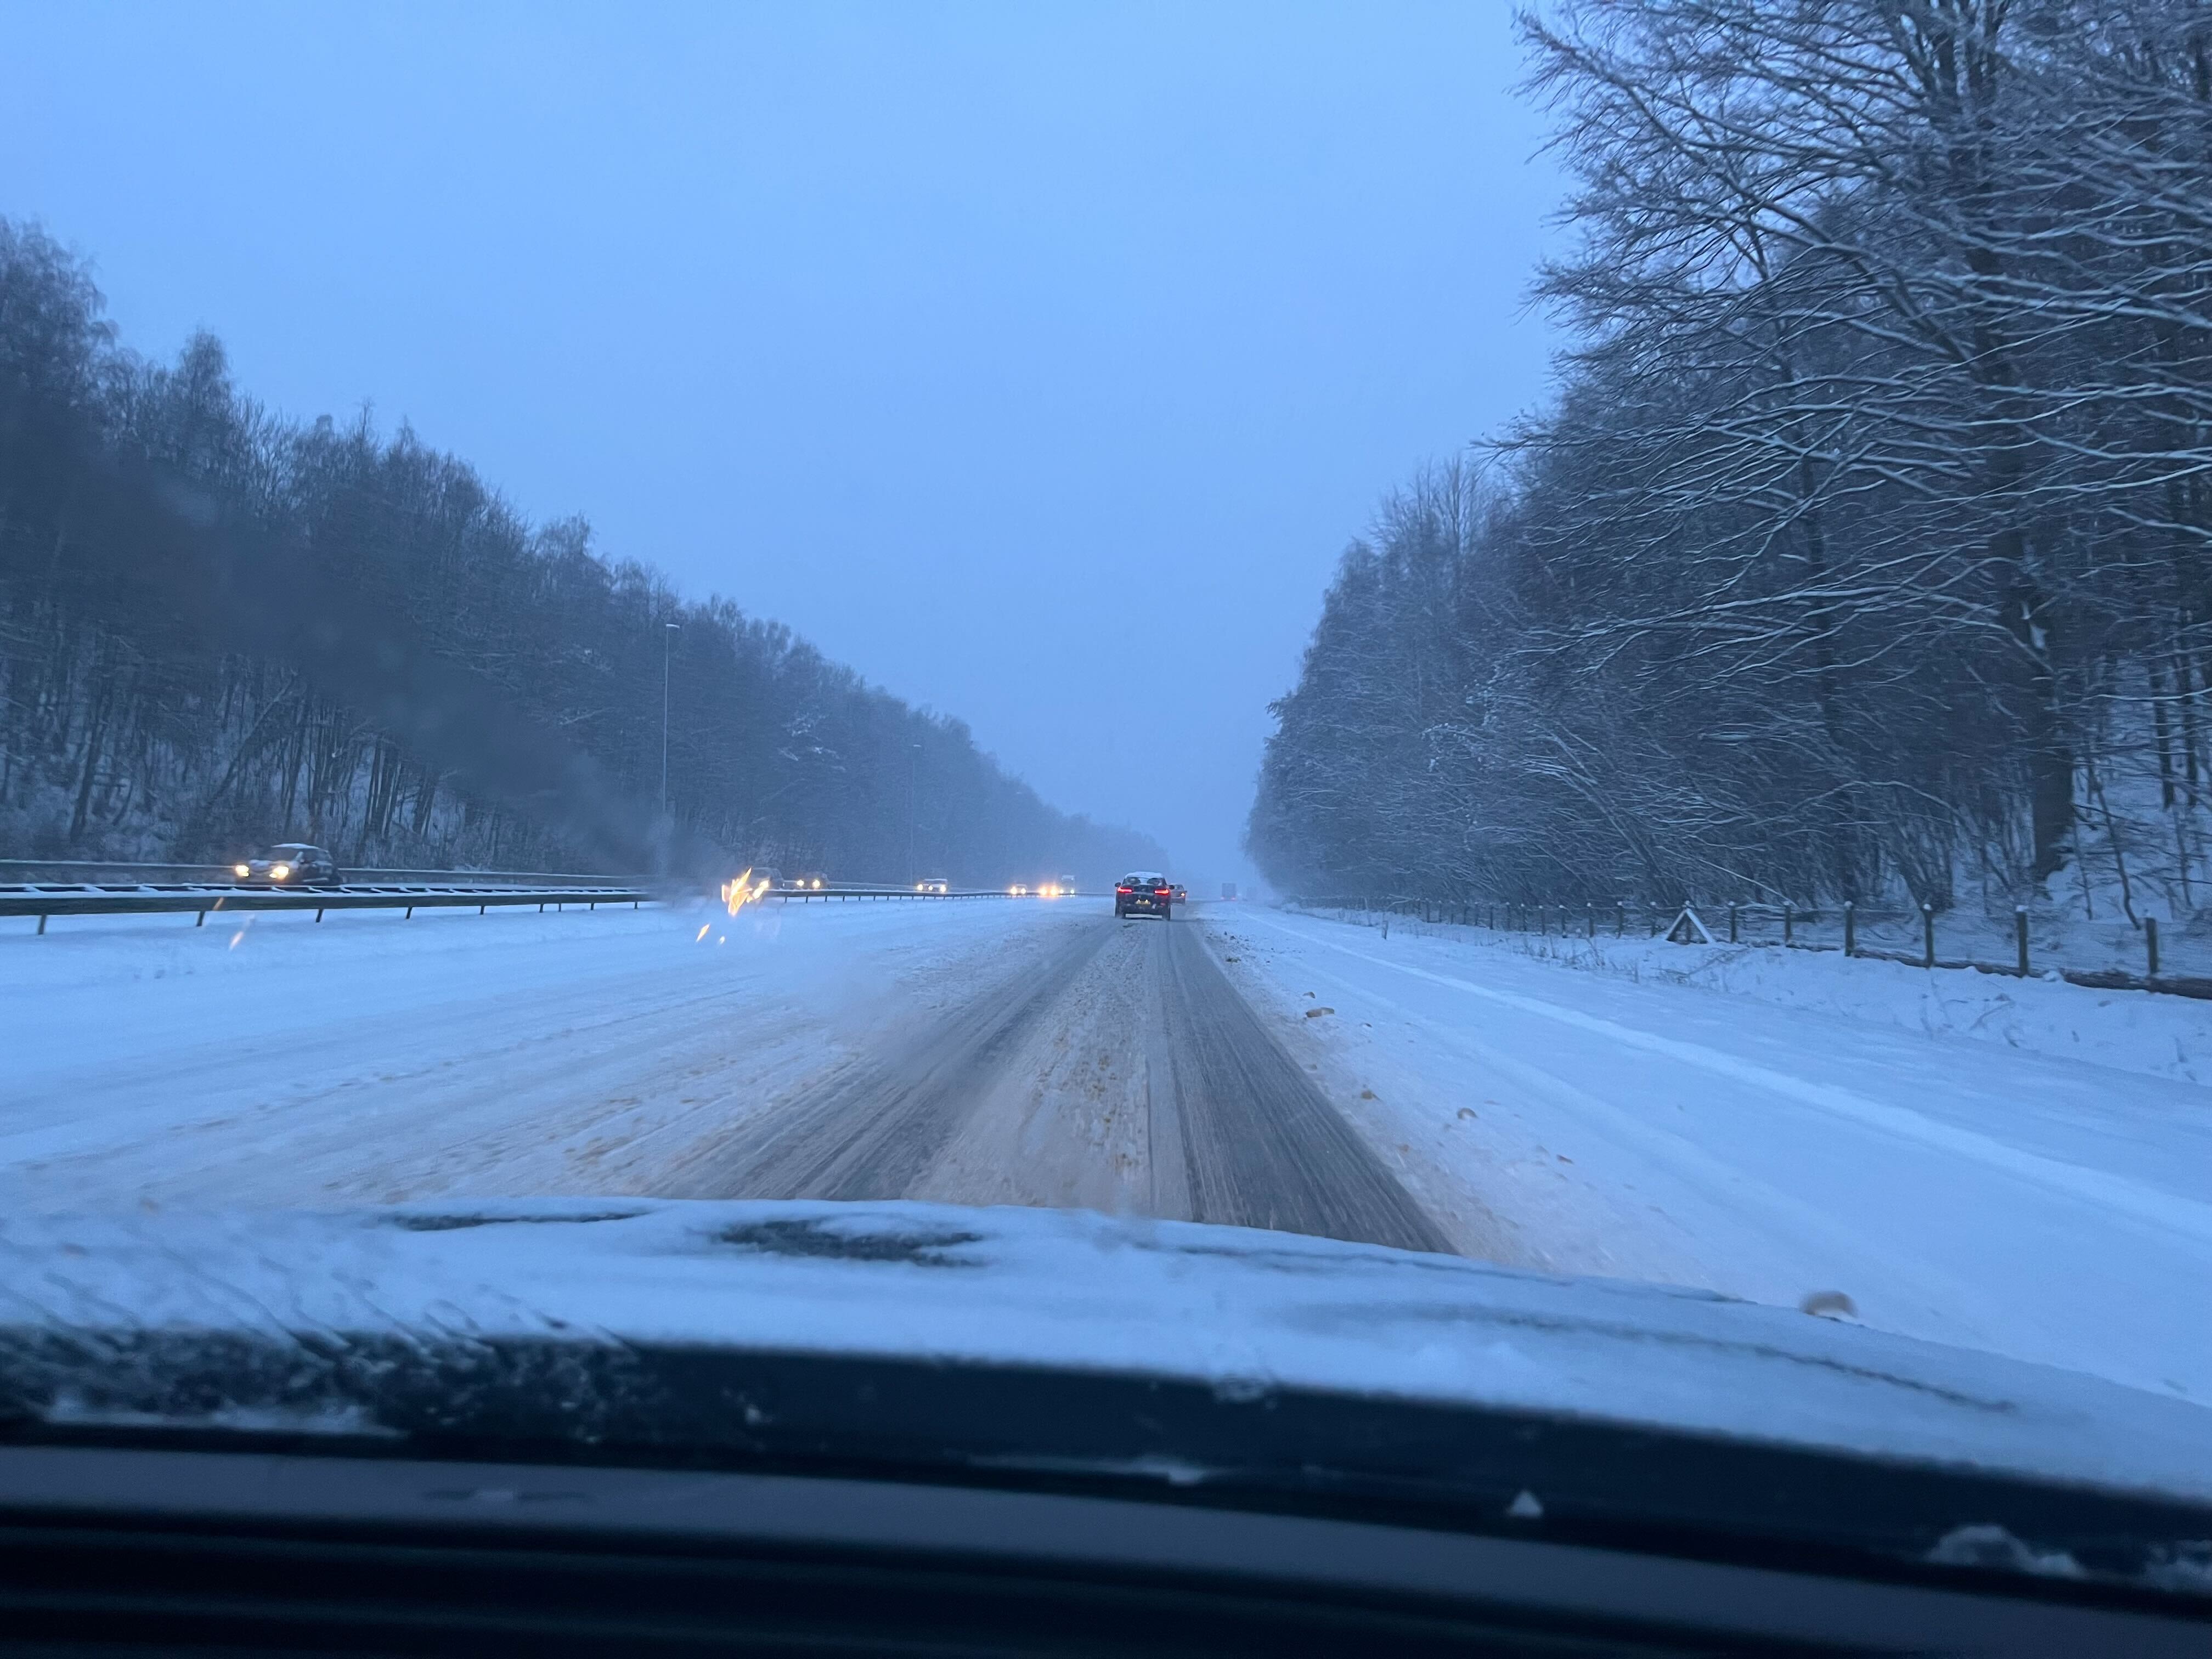 It is snowing too hard to keep the highways passable.  The right lane can be driven at 30 km per hour.  Photo: Berend van Straaten.